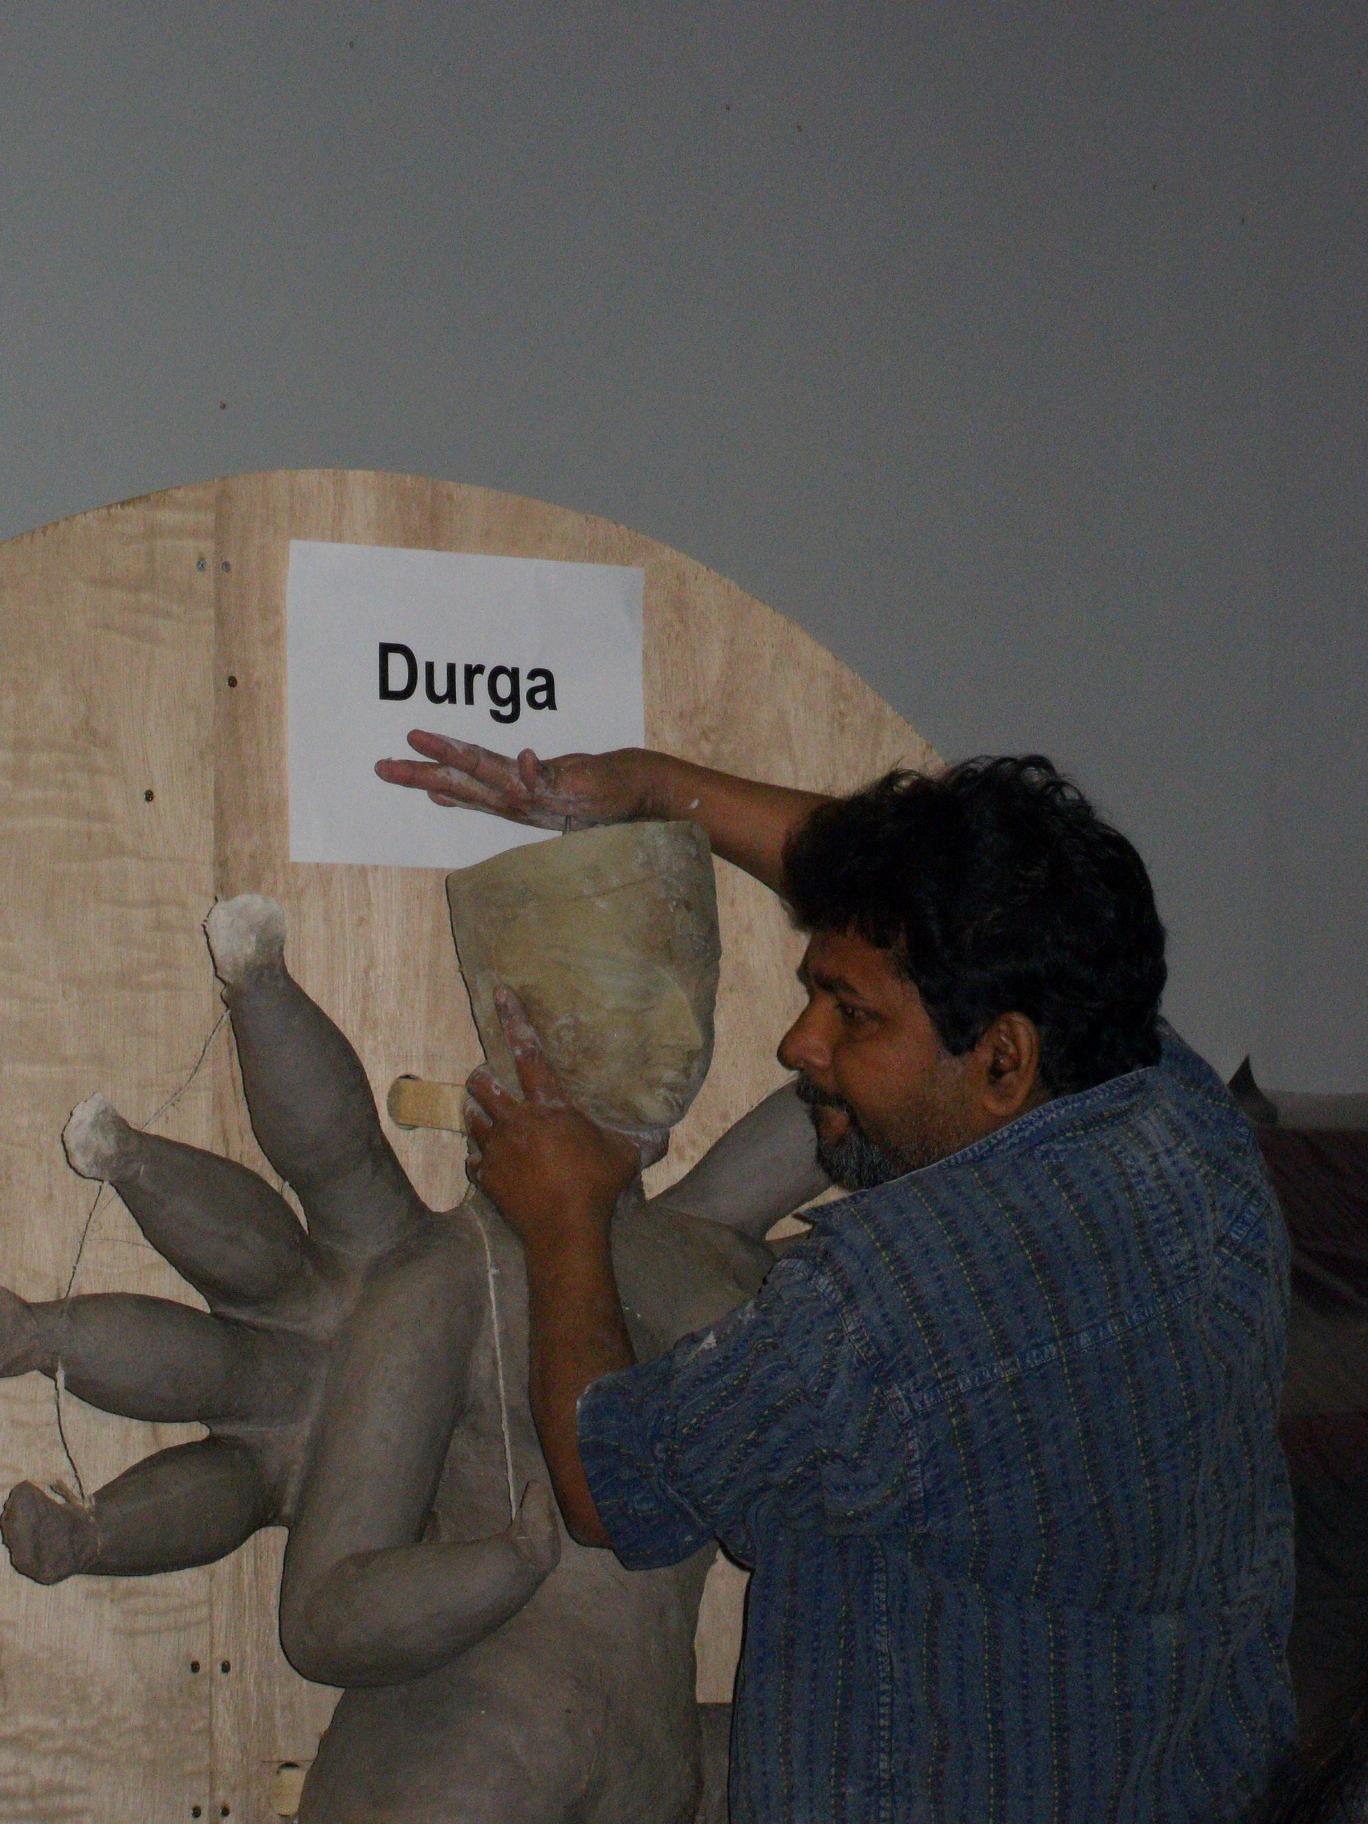 Placing a mask, already made by the artists, on the Goddess Durga's face